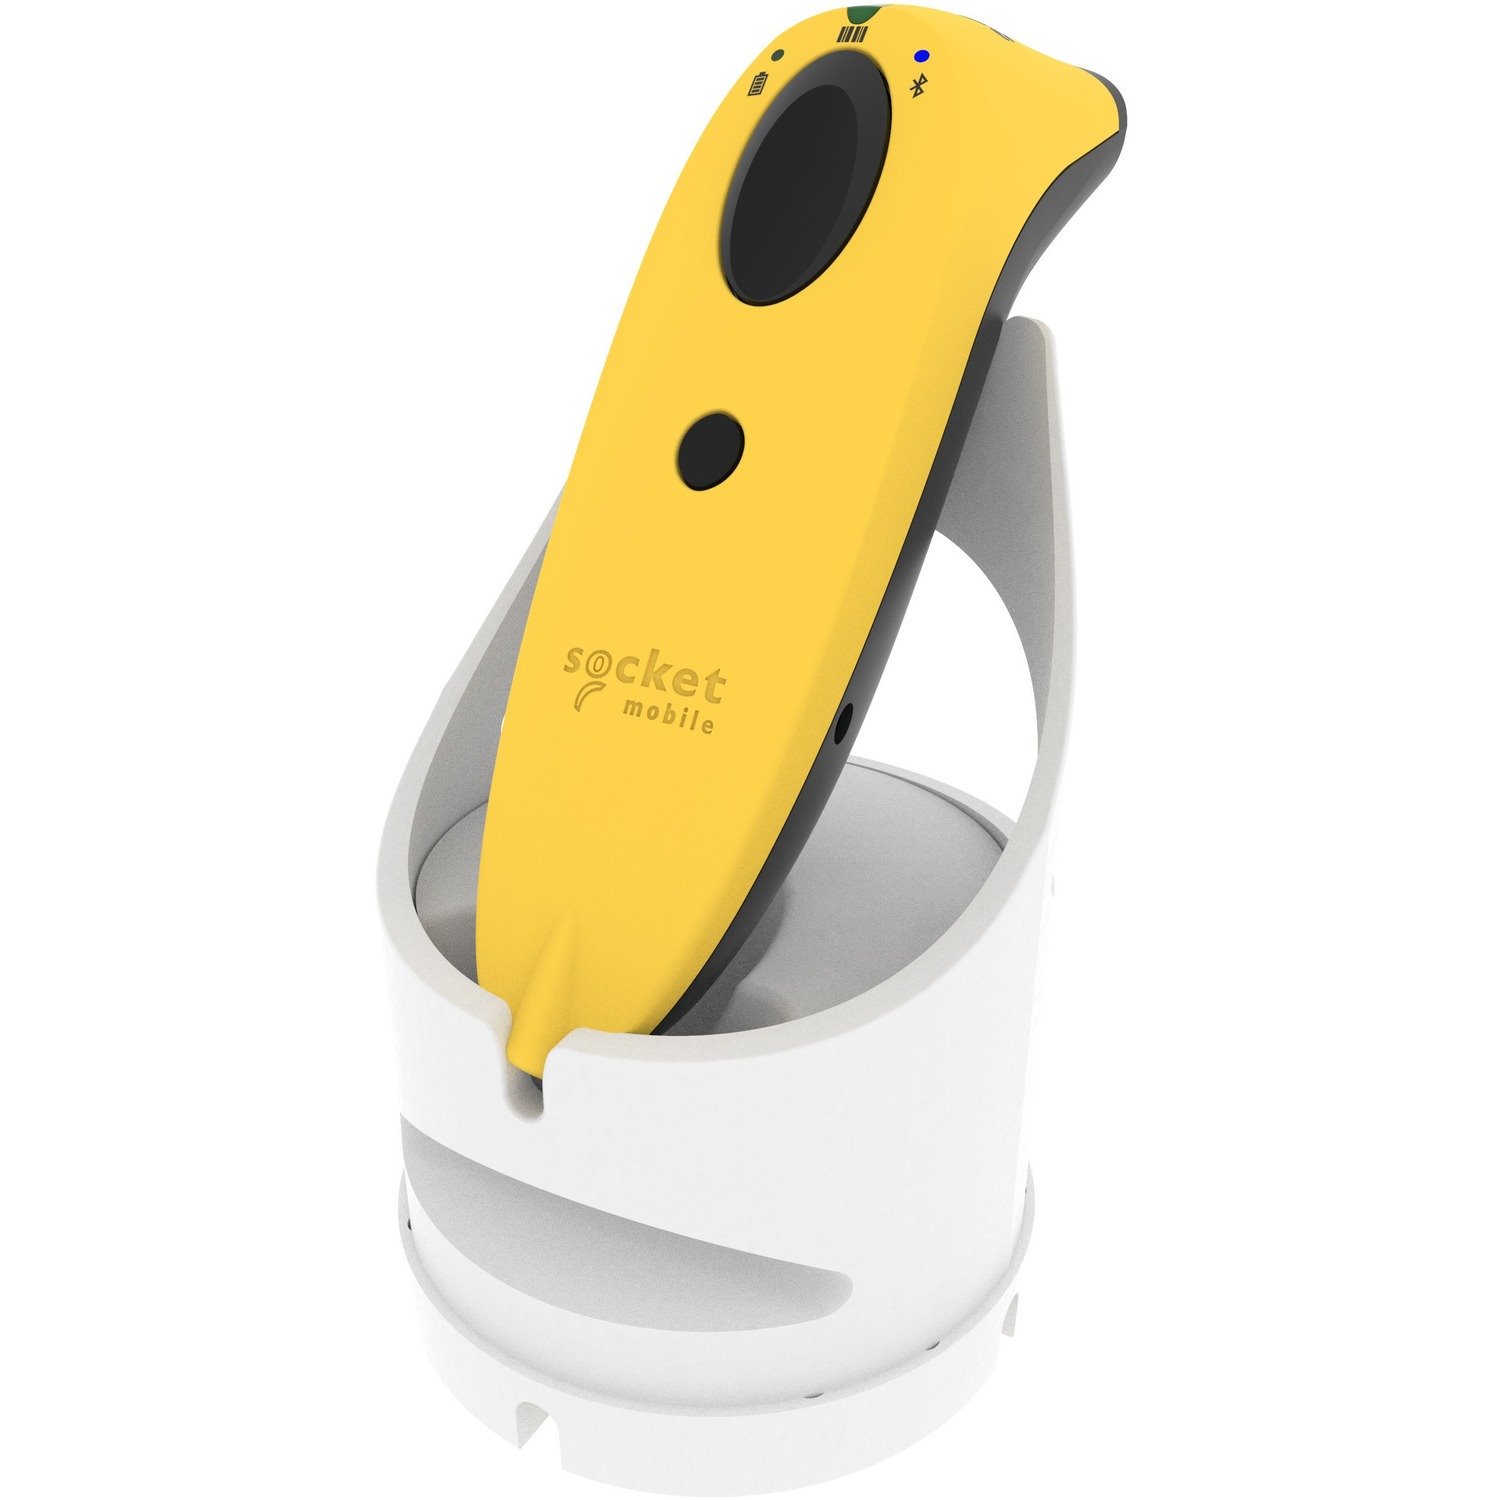 Socket Mobile S720 Transportation, Loyalty Program, Delivery, Hospitality, Inventory, Asset Tracking, Ticketing Handheld Barcode Scanner - Wireless Connectivity - Yellow, Black, Blue, Green, Red, White